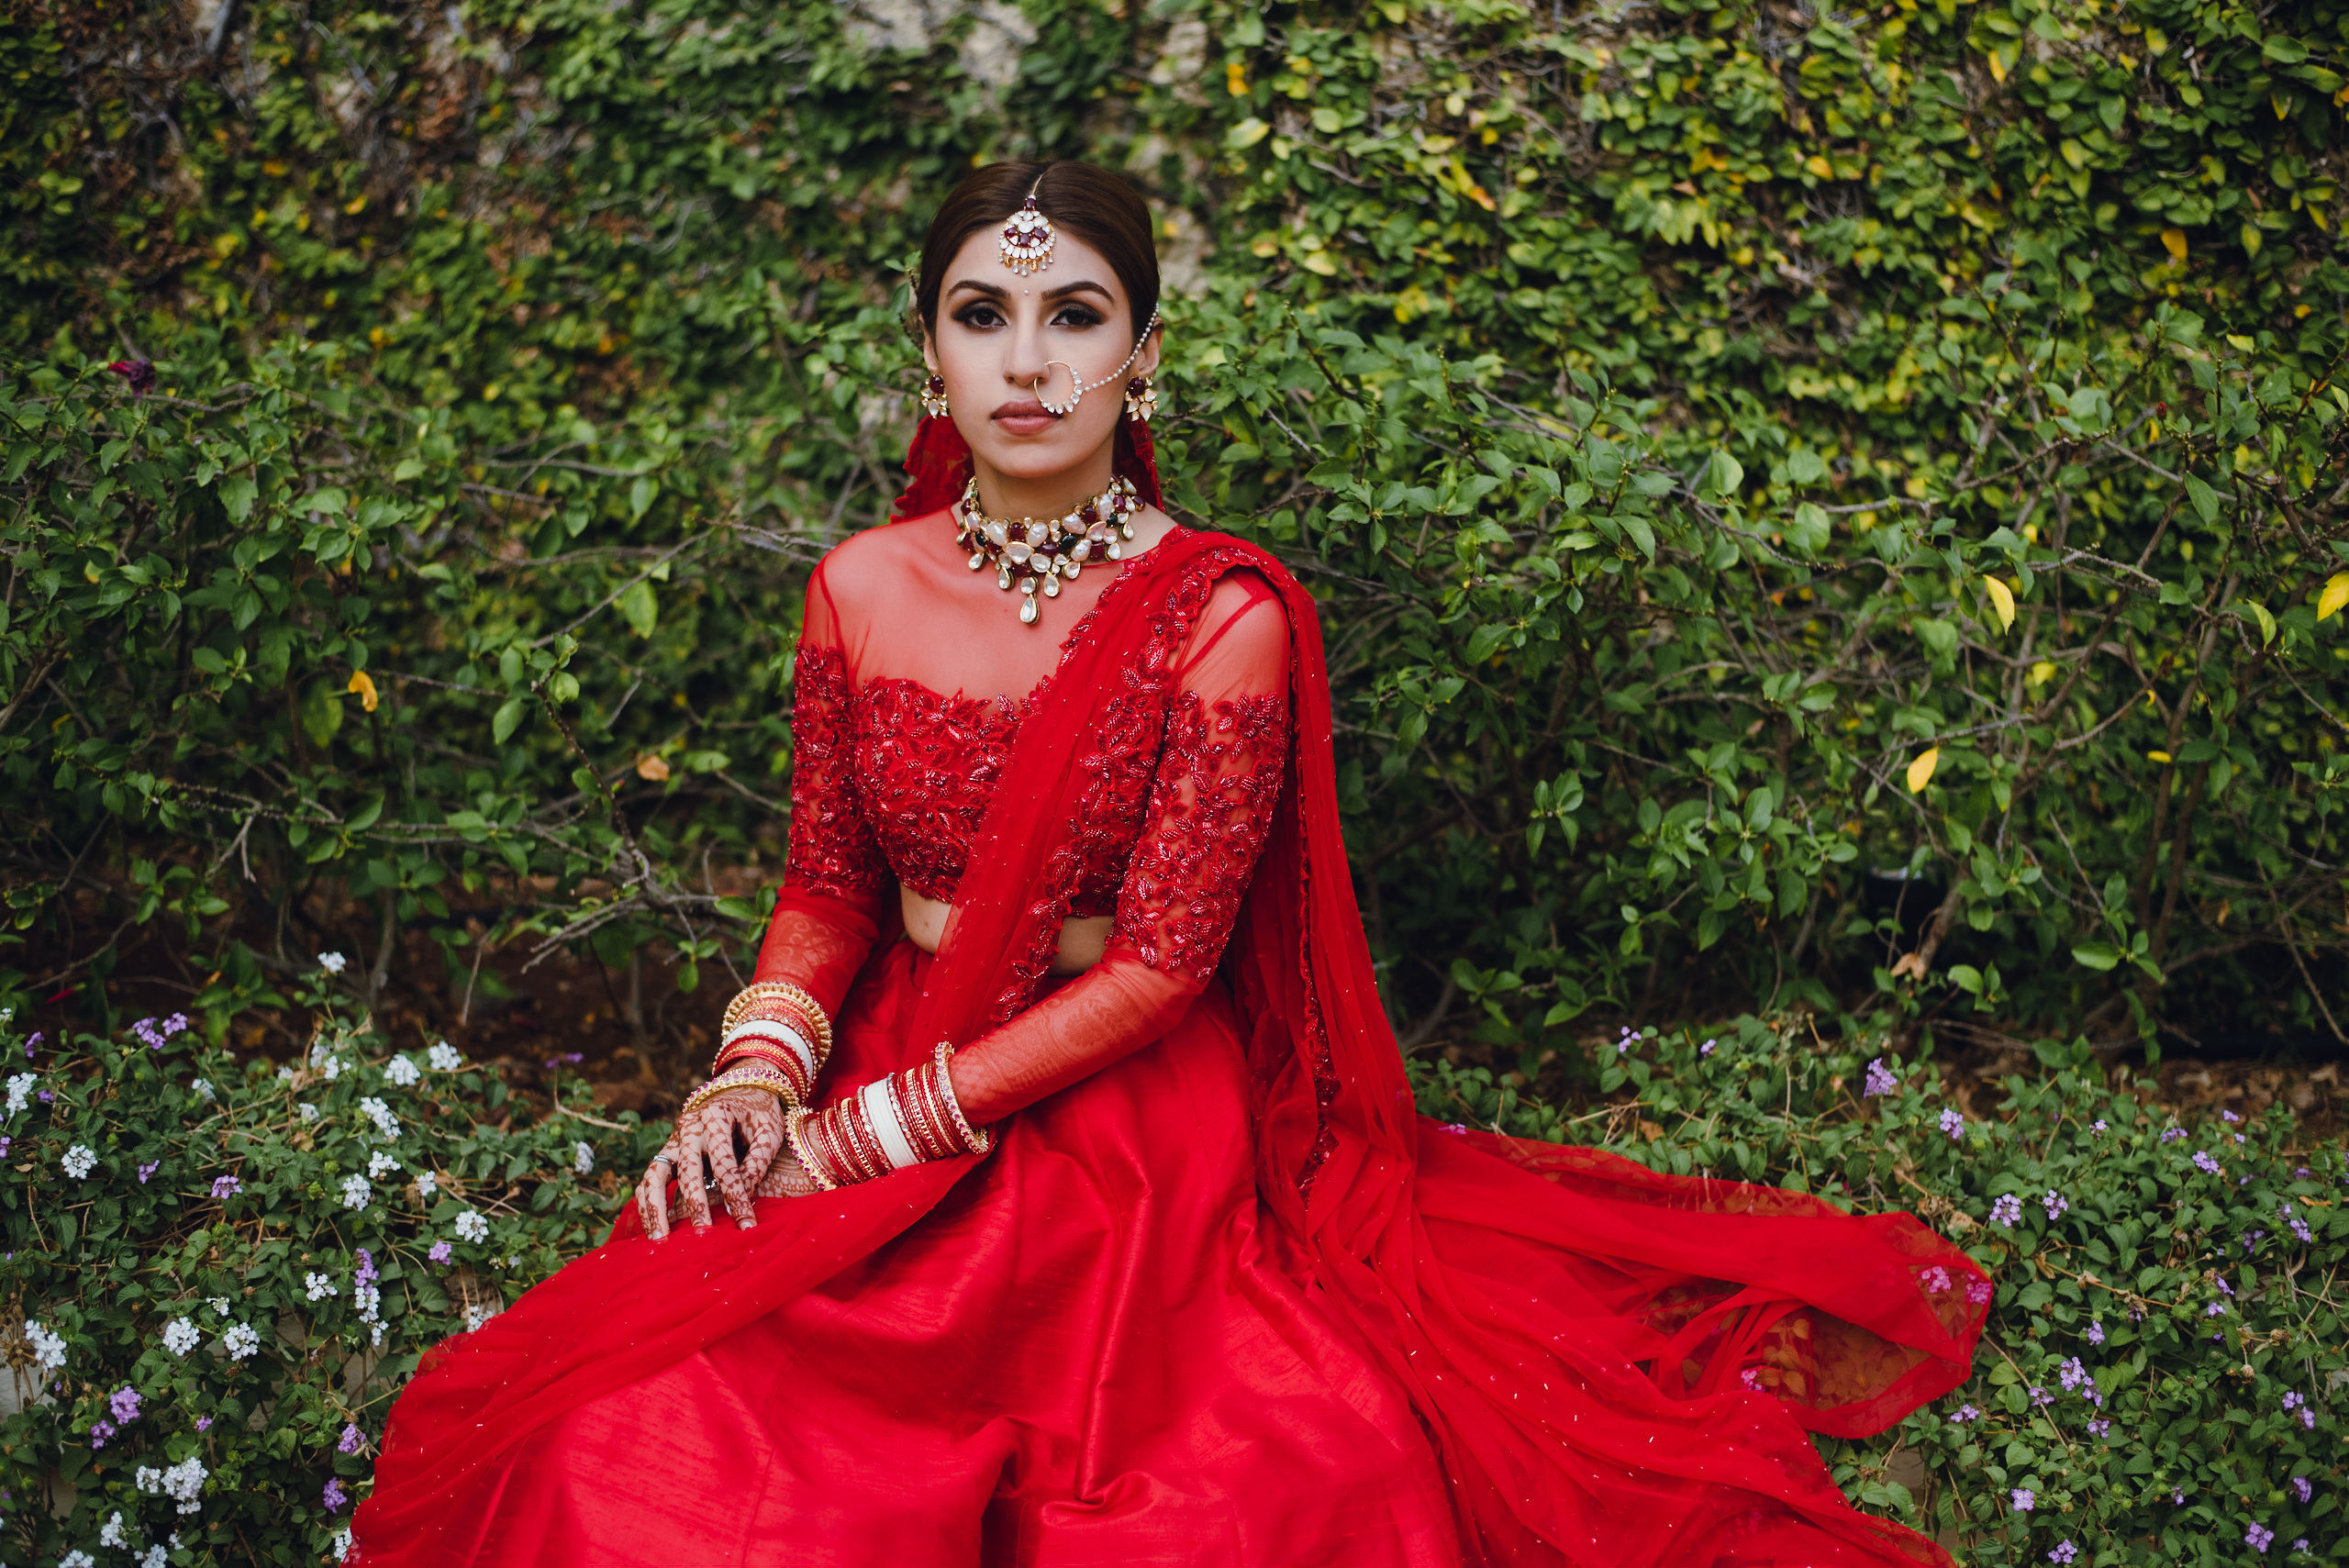 How to budget for an Indian wedding? We asked 8 real brides